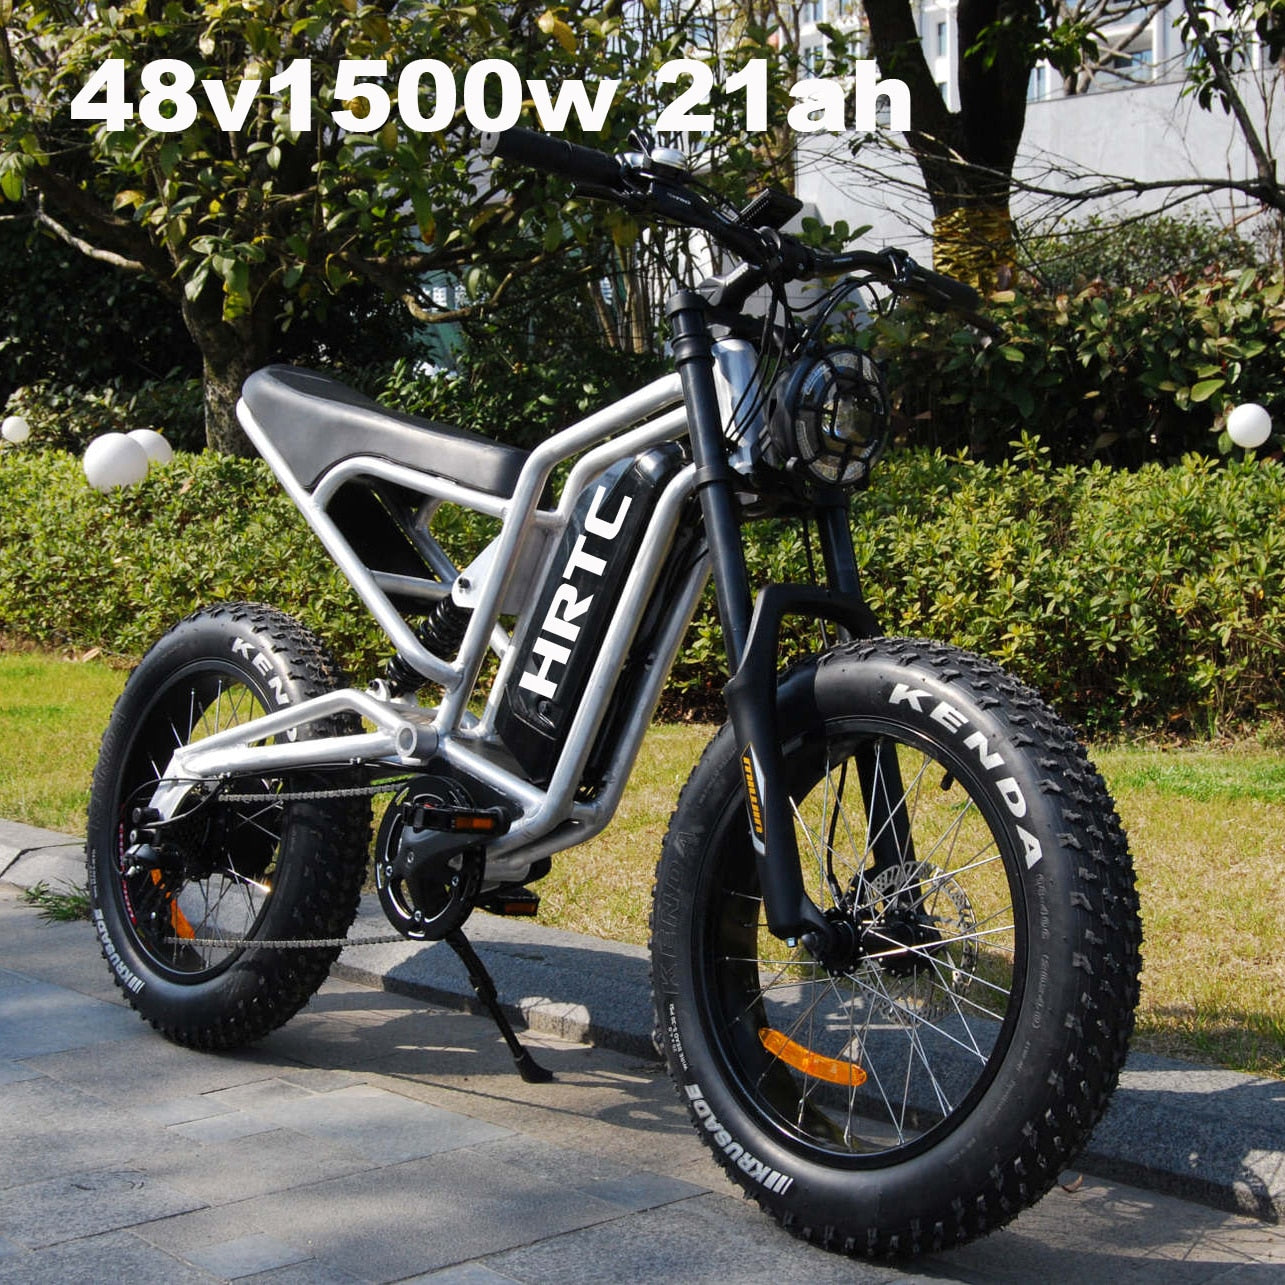 20 inch off-road moped wide tire lithium battery snowmobile mountain bike electric bicycle 48V snow fertilizer tire bicycle - 0